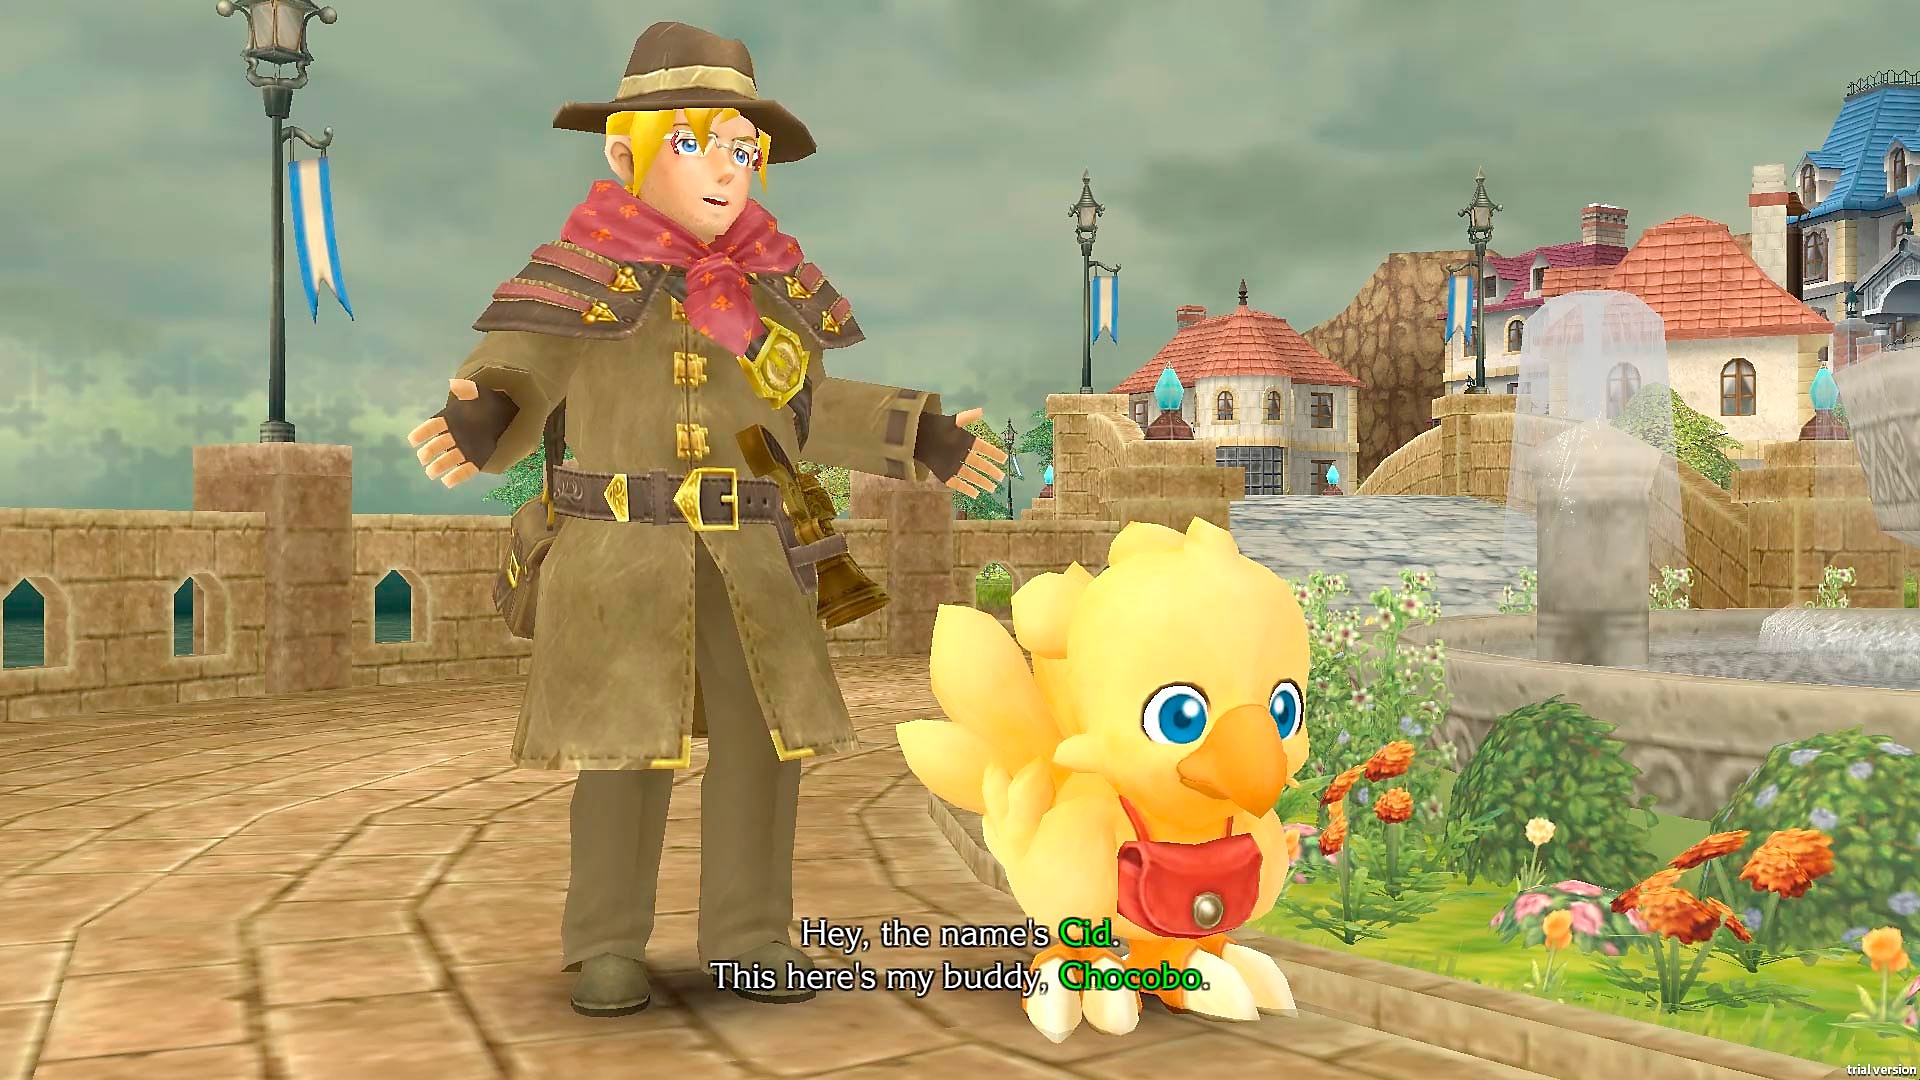 Chocobo’s Mystery Dungeon - Every Buddy! story trailer